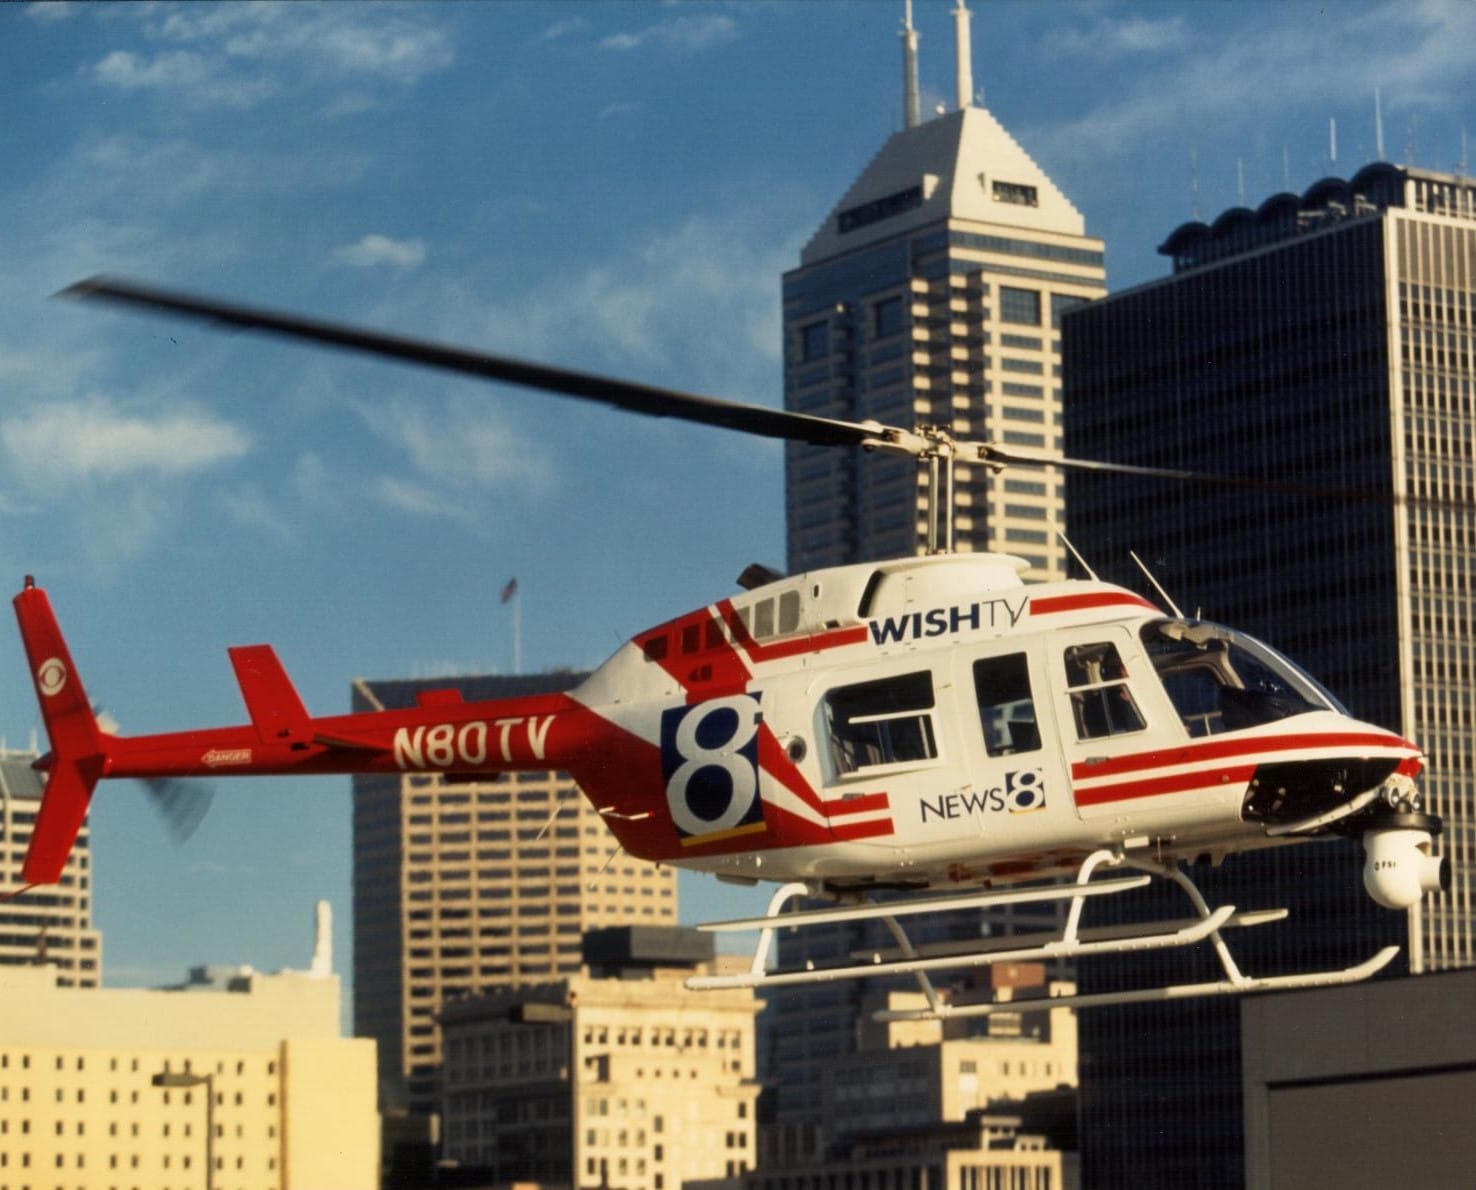 The crown jewel in the WISH-TV vehicle collection, Chopper 8.